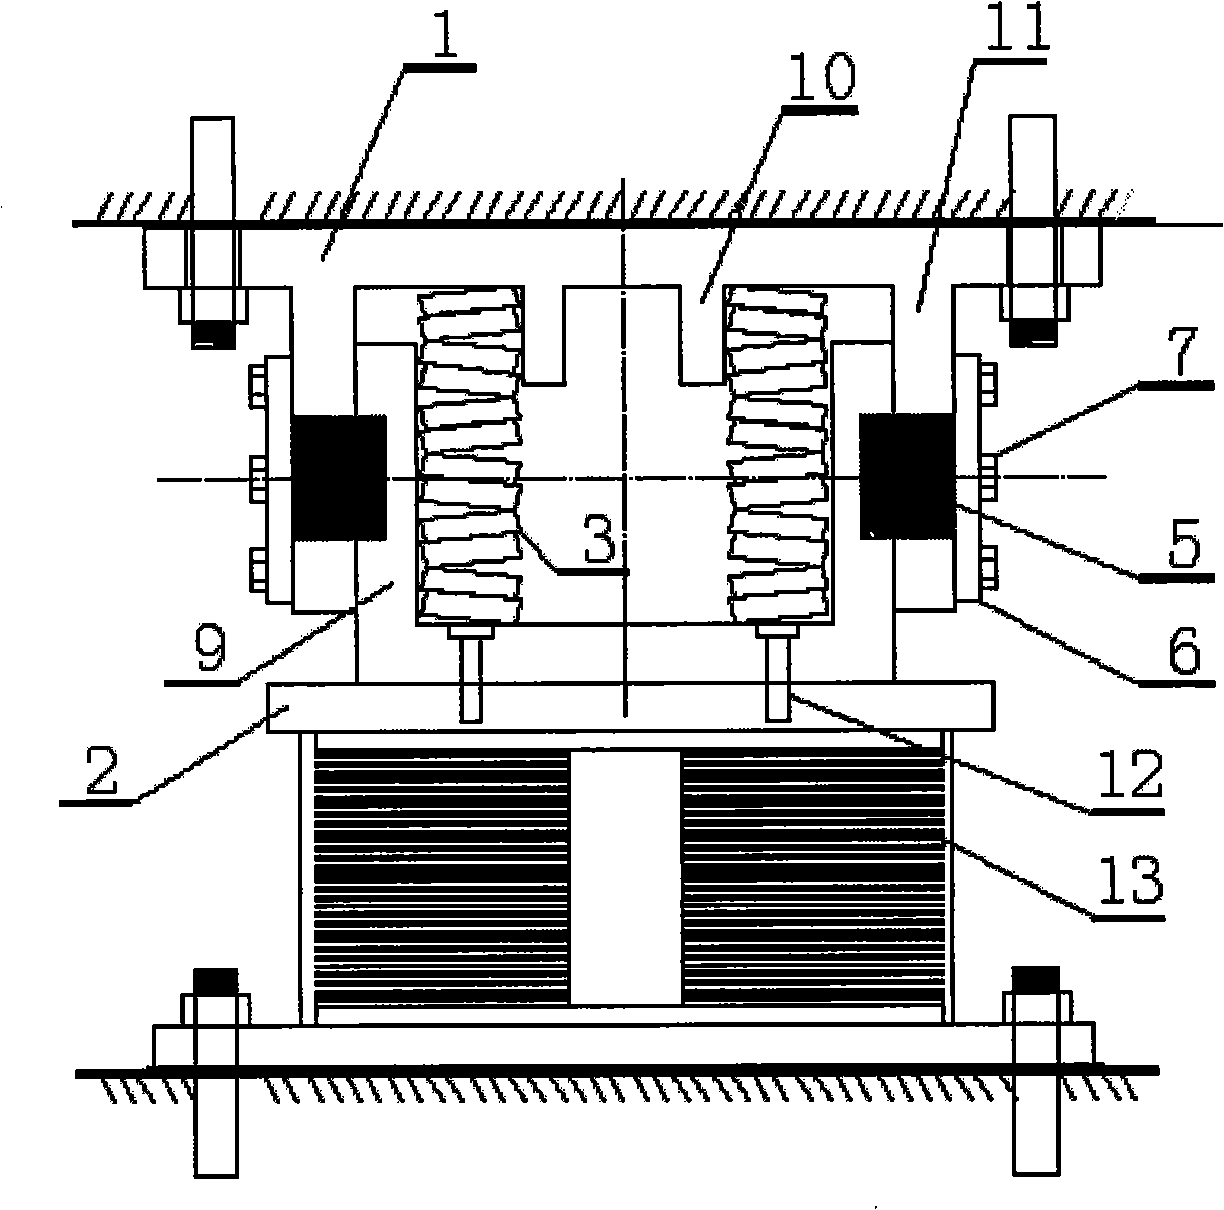 Vertical spacing -type lead shearing three-dimensional vibration isolation device